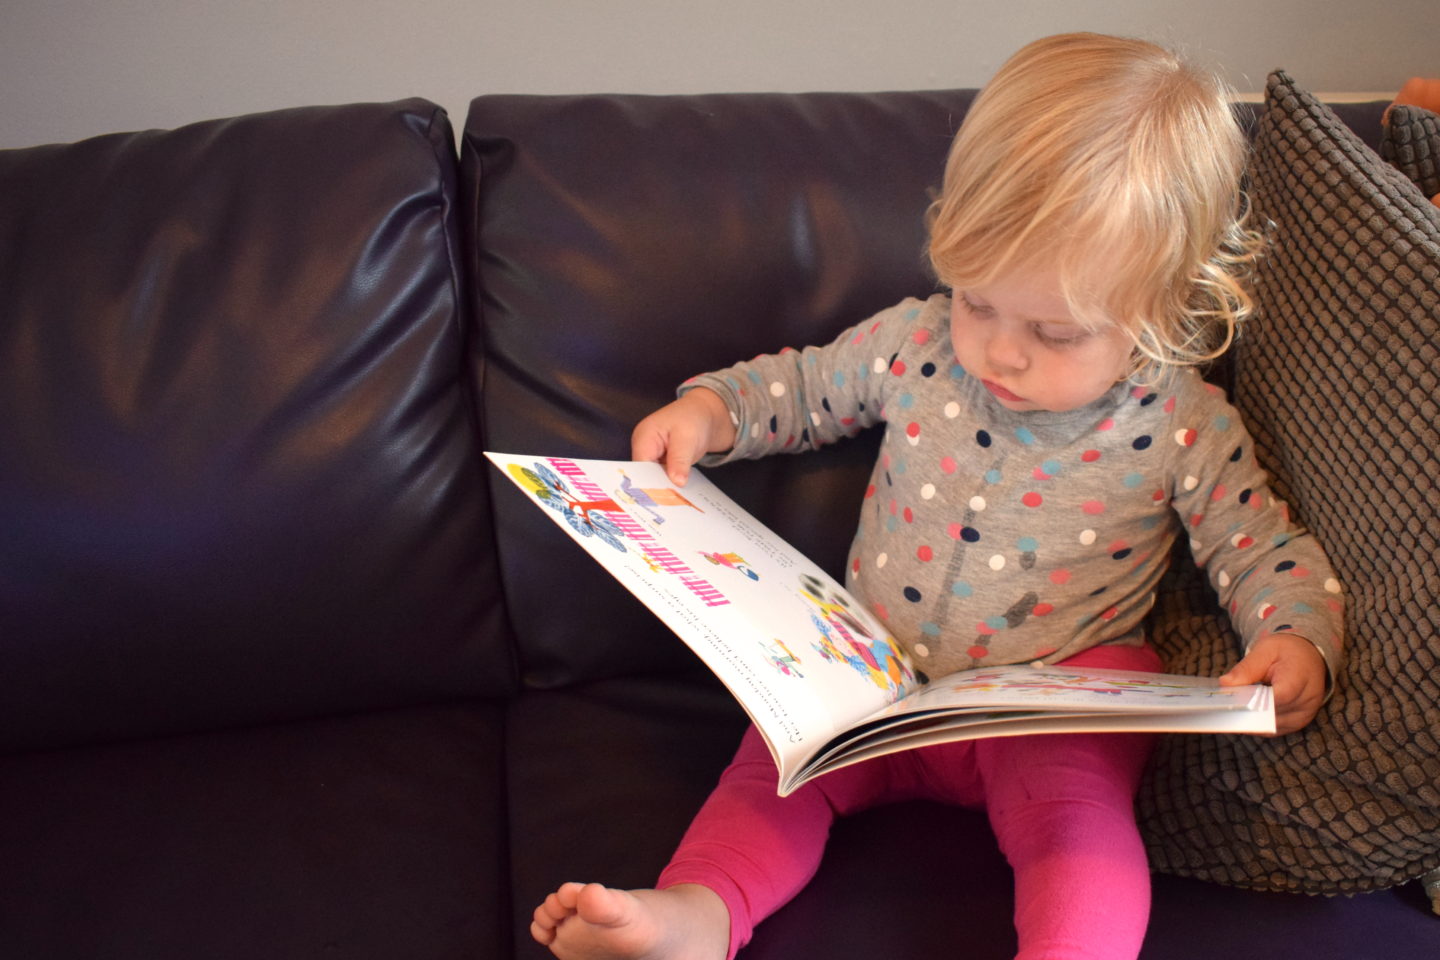 18 month old girl reading a book on the sofa - time to read